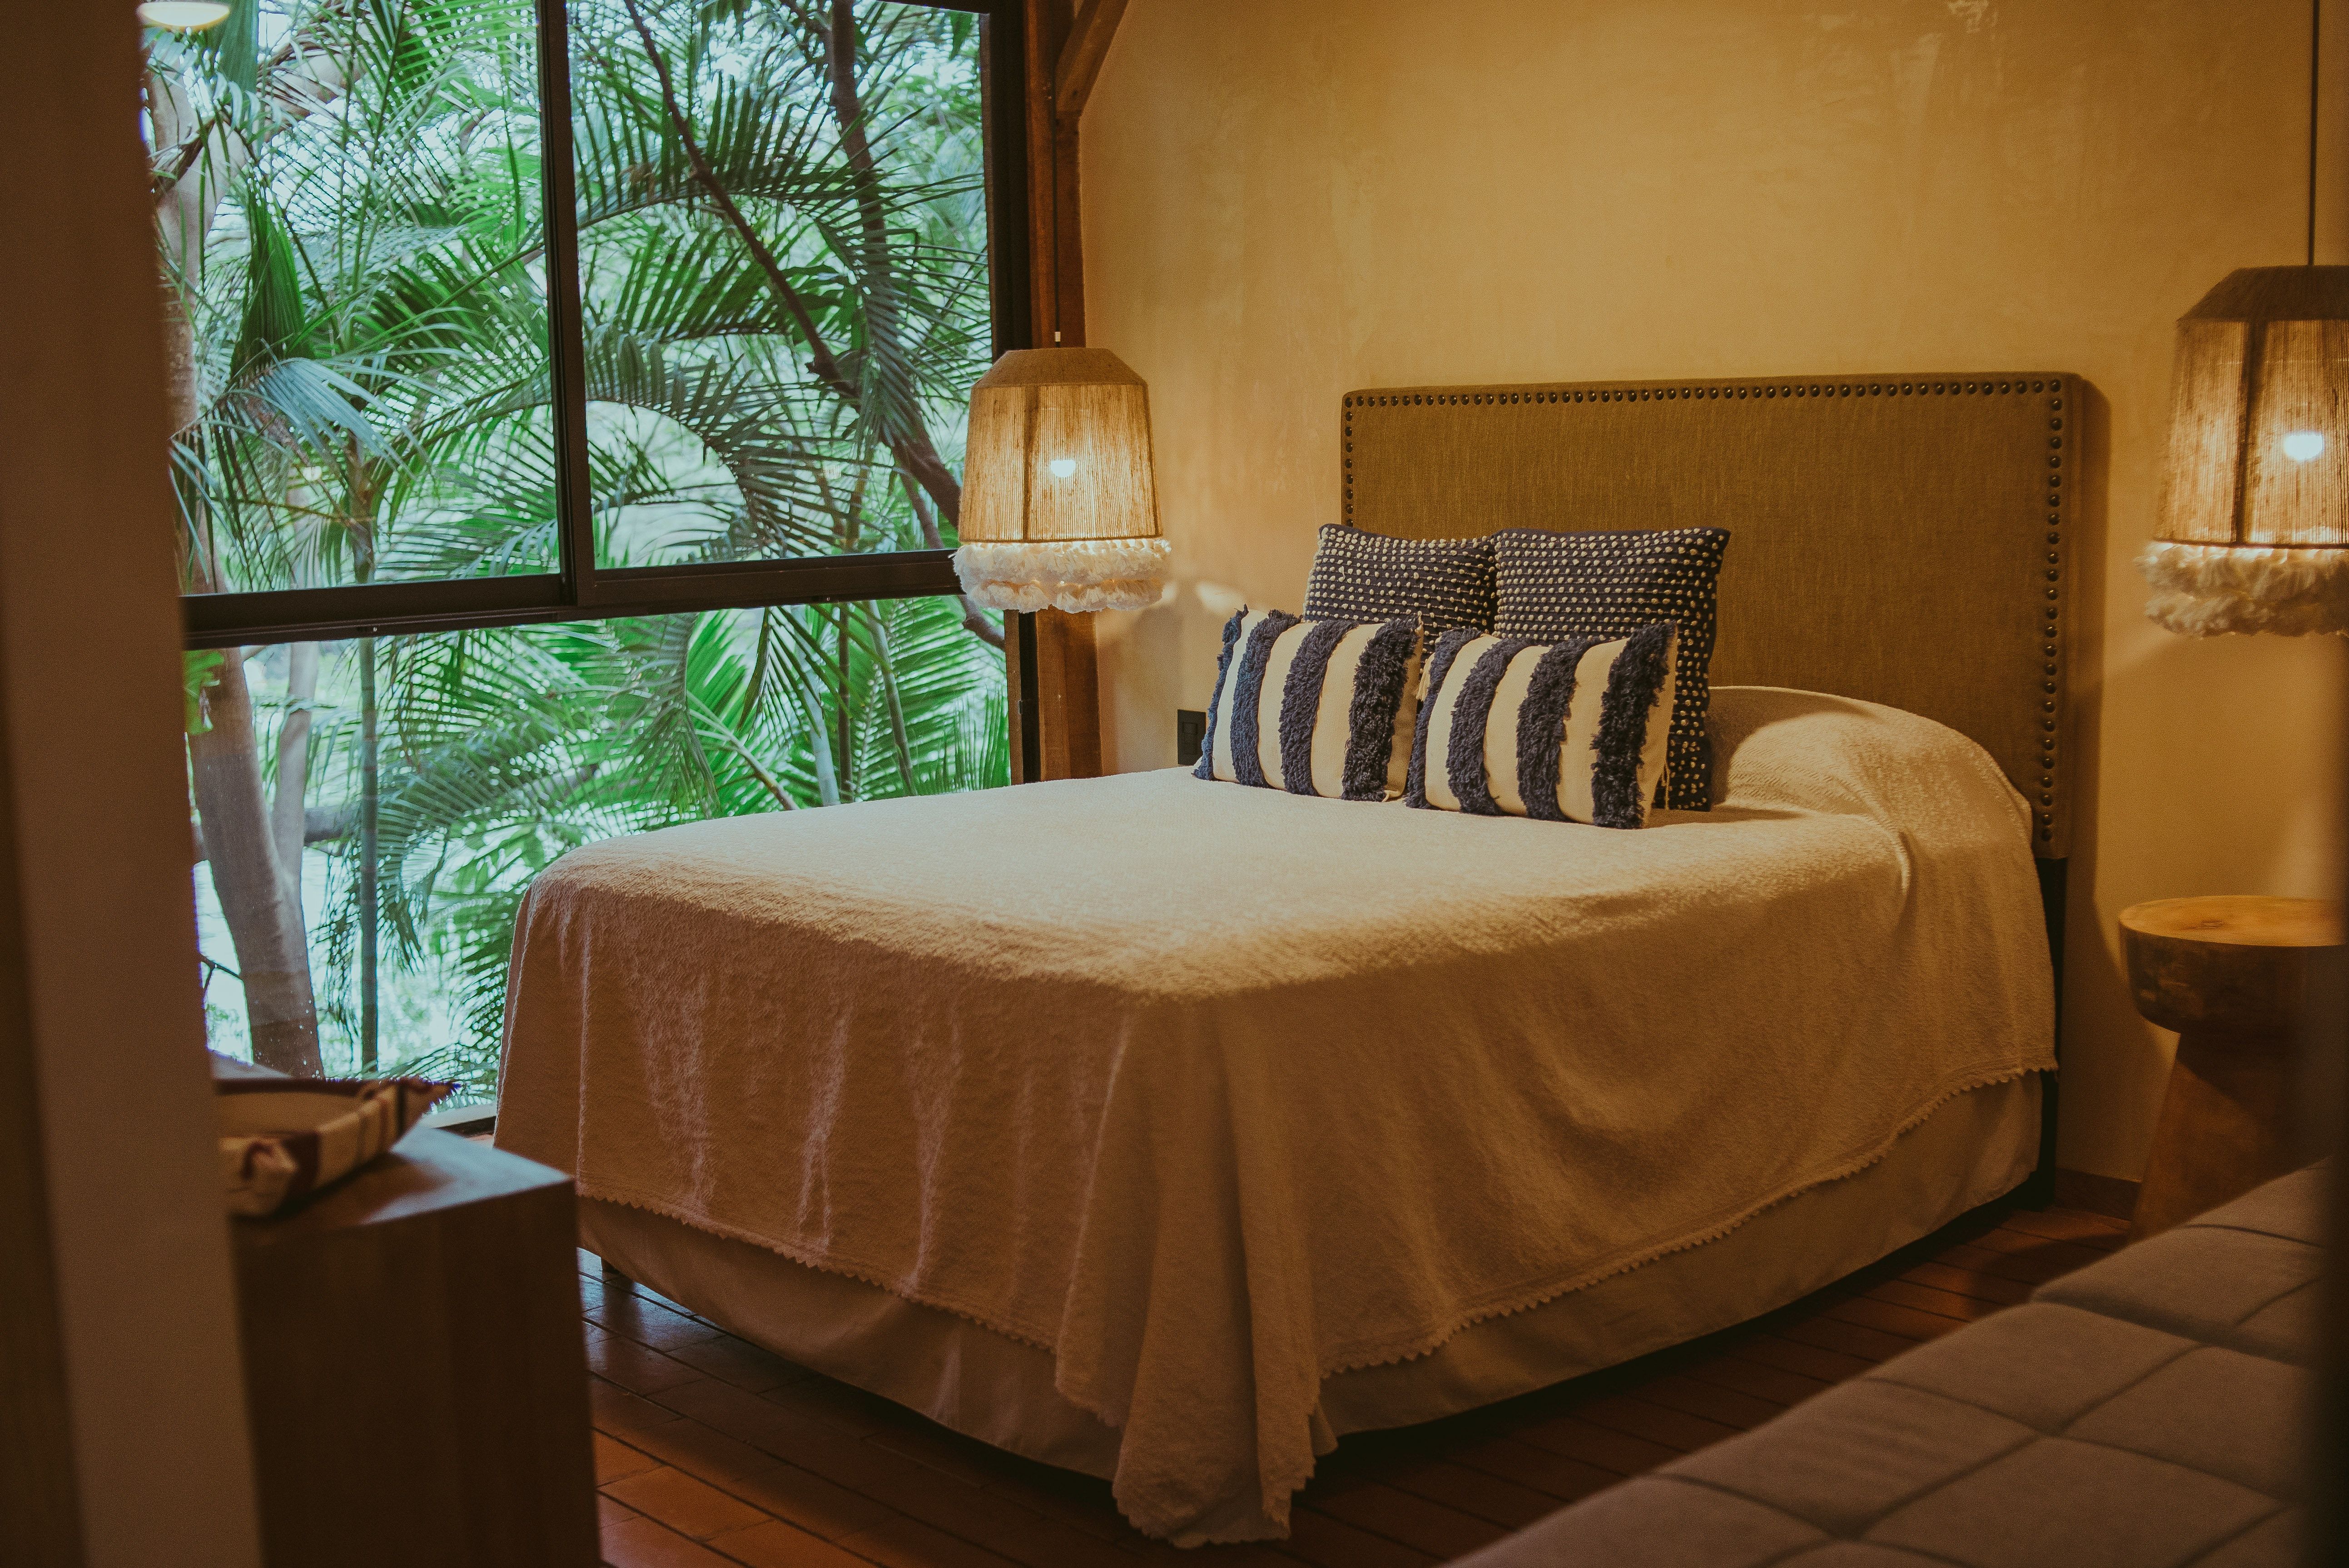 Hotel Bedroom with Palm Leaves behind Window